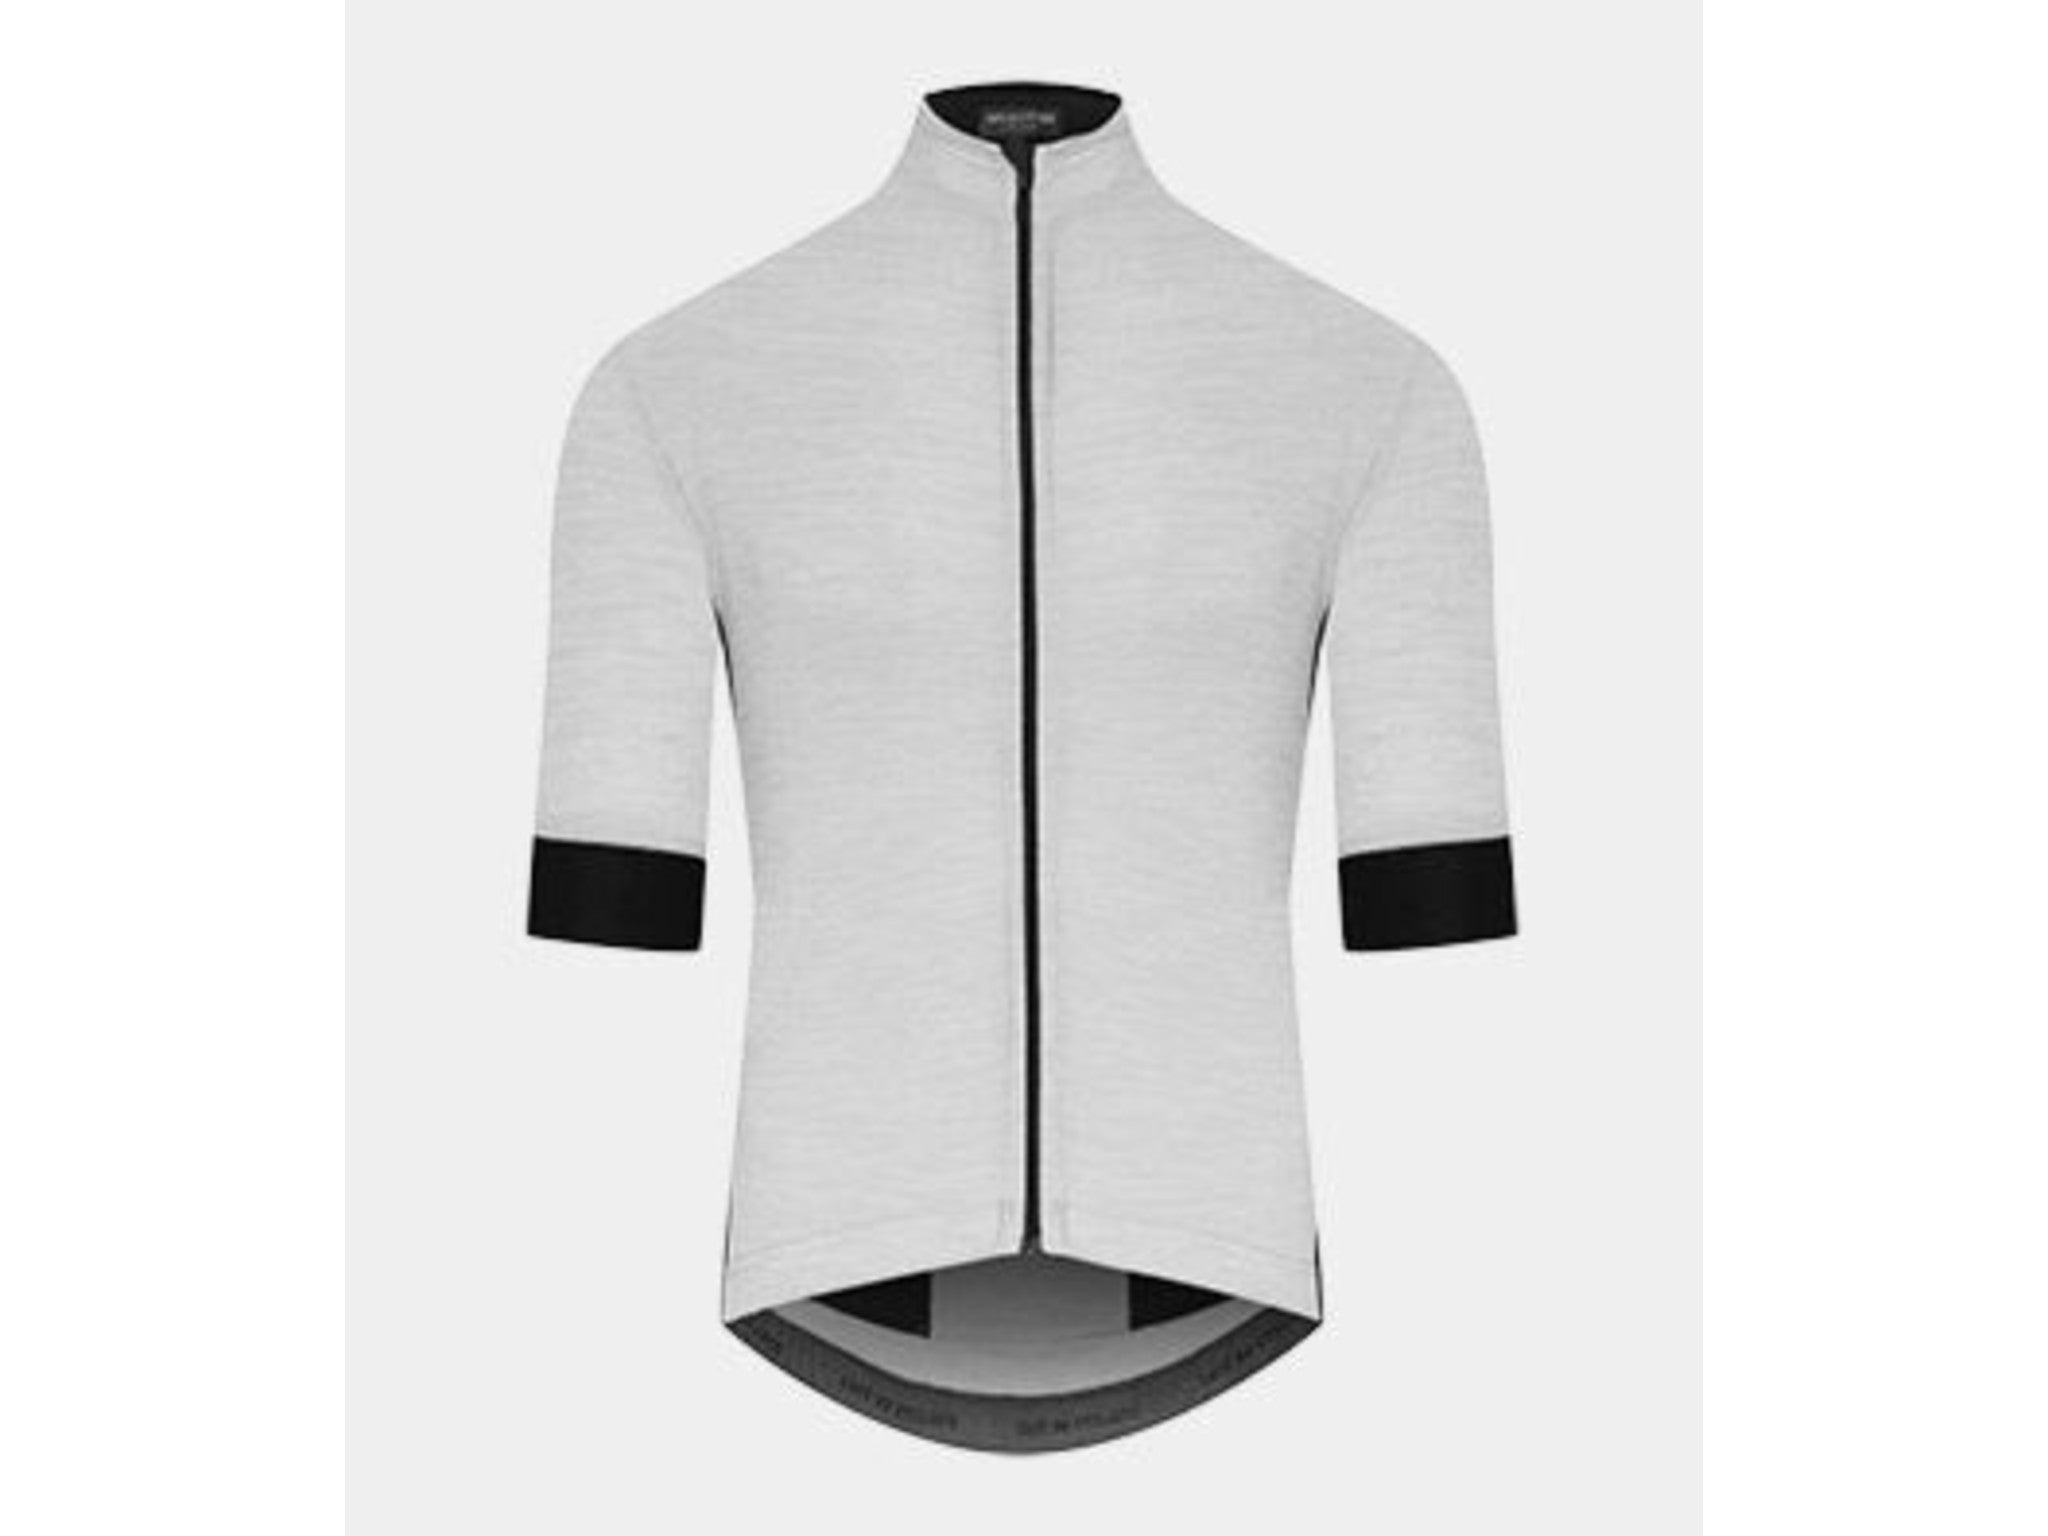 Café du Cycliste’s eglantine merino jersey was recommended as our men’s cycling jersey